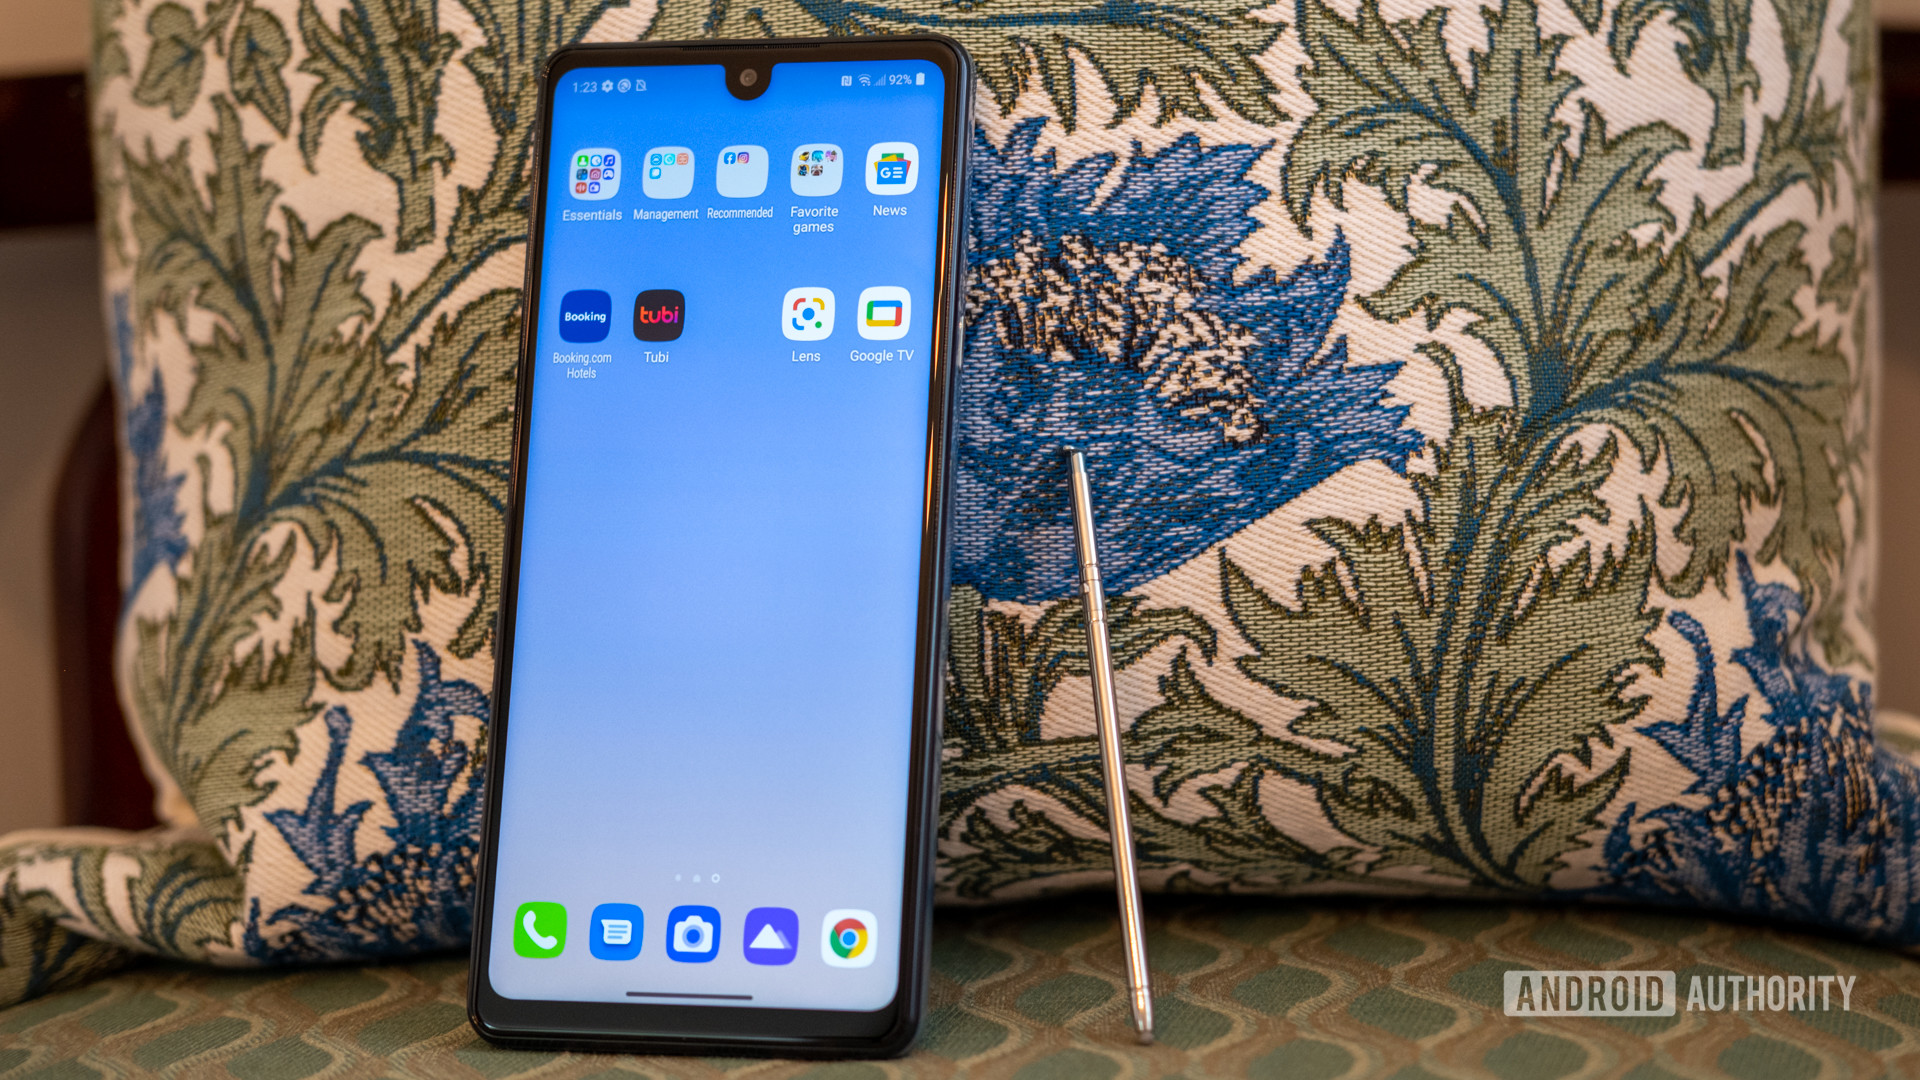 LG Stylo 6 open to extra apps on a patterned chair